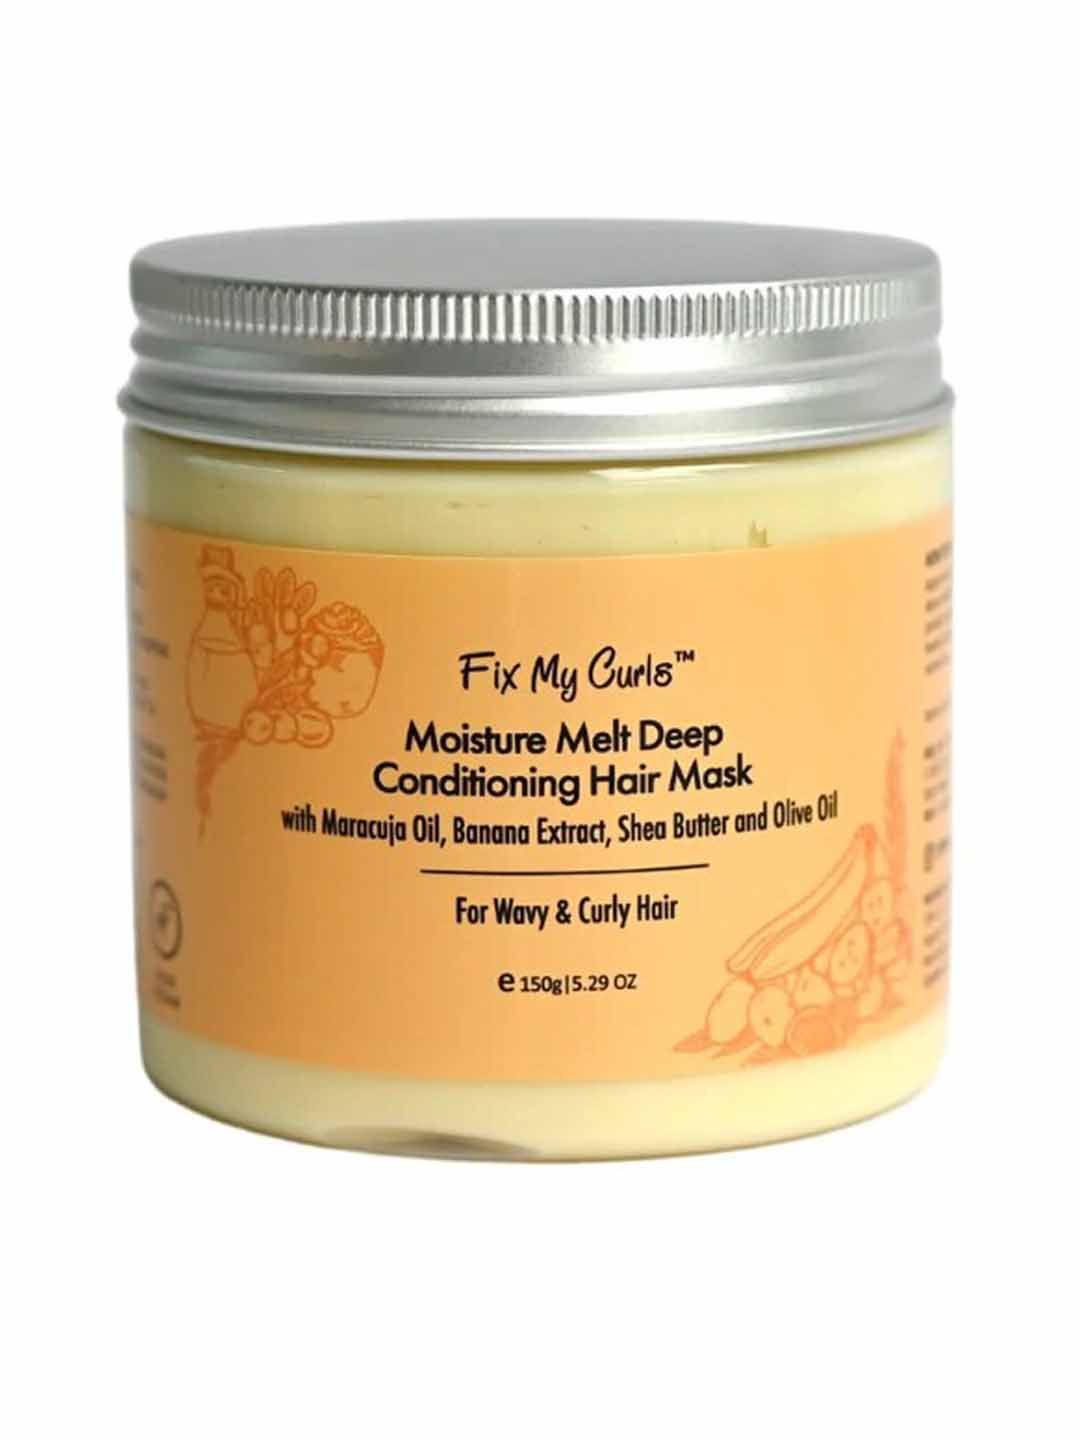 Fix My Curls Moisture Melt Deep Conditioning Shea Butter & Olive Oil Hair Mask 150 g Price in India